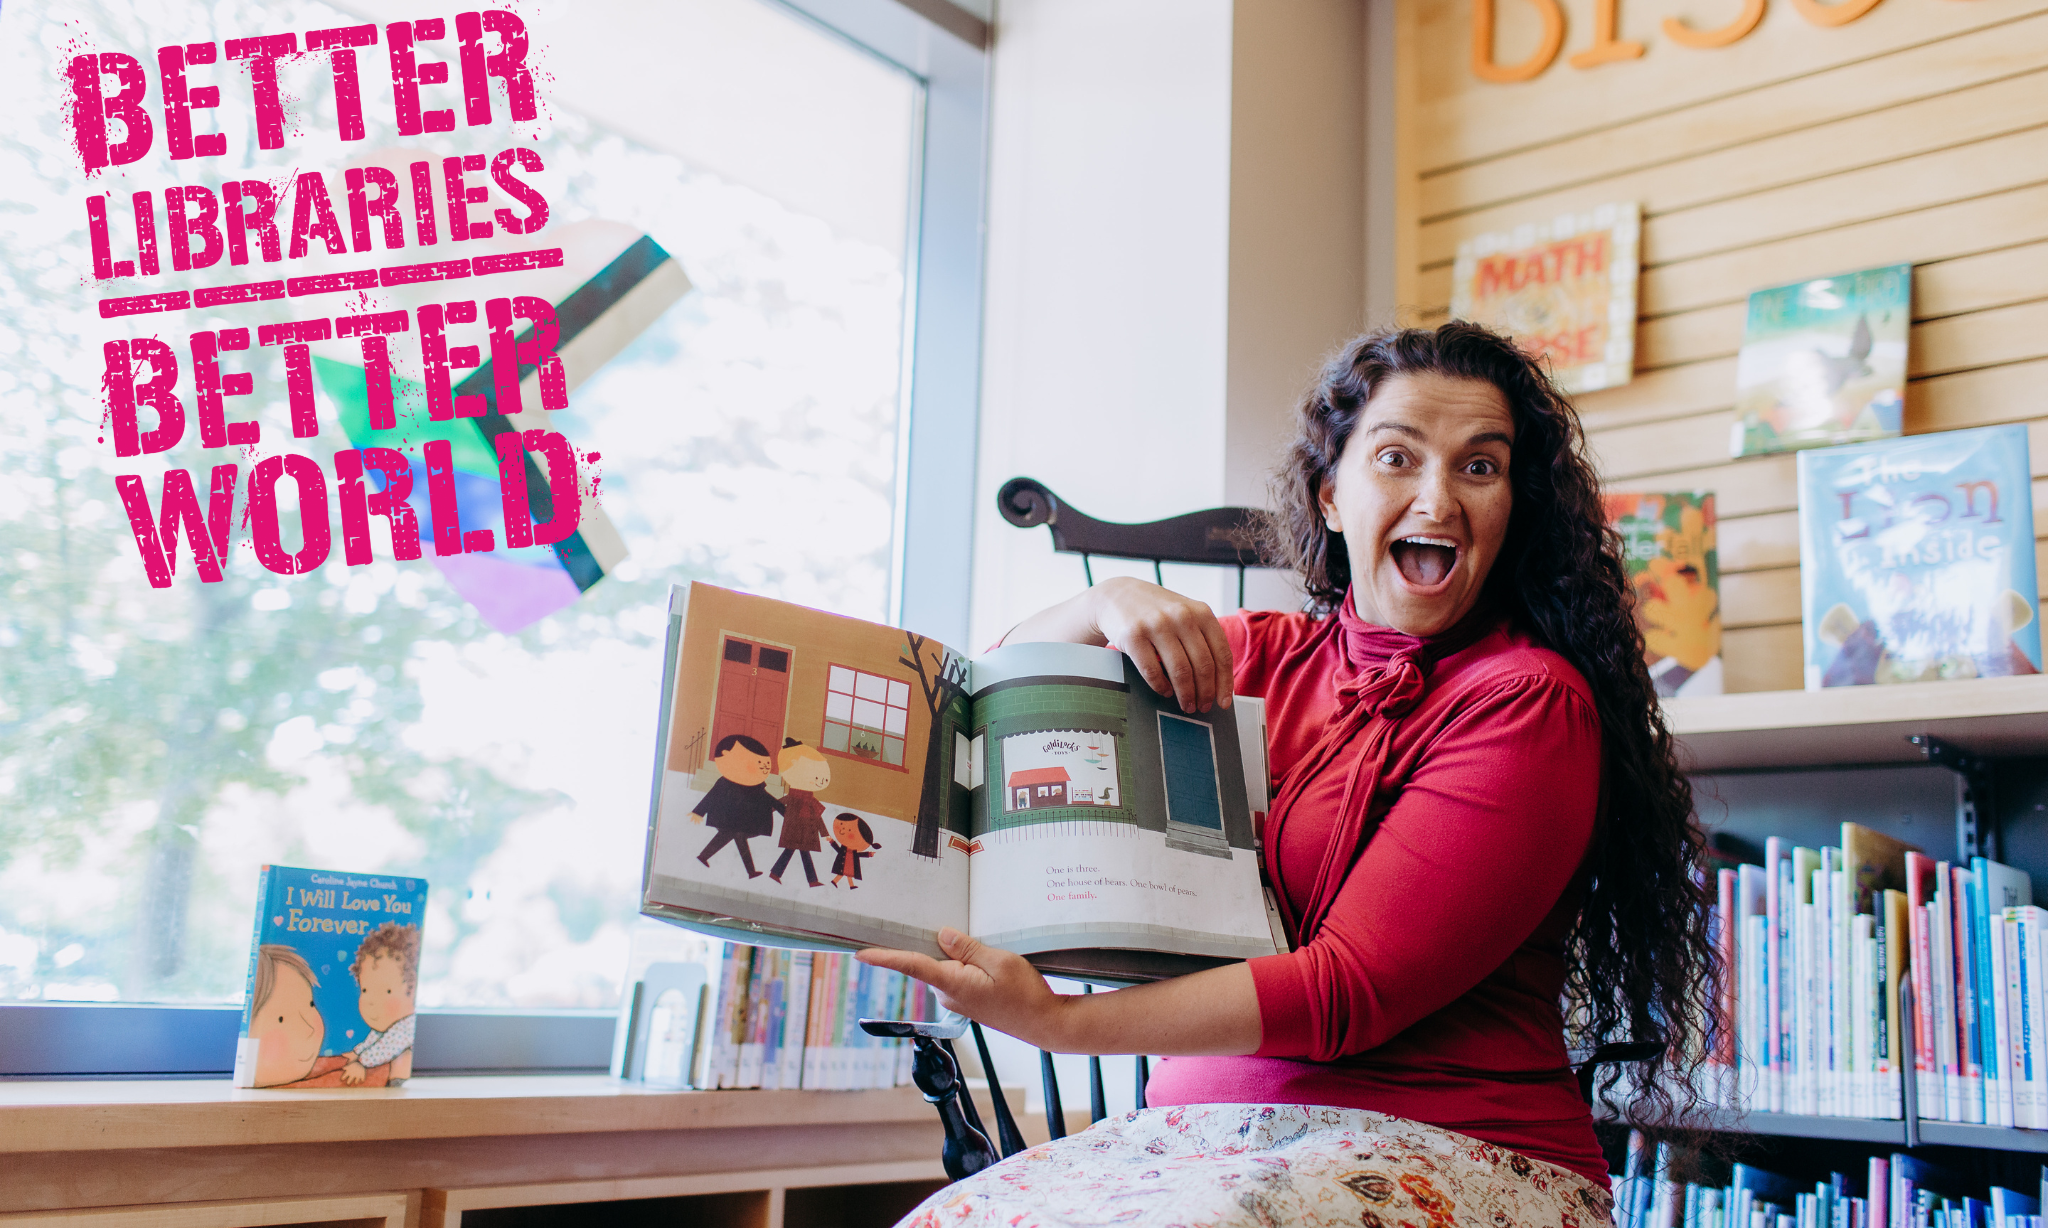 woman smiling in library holding children's book